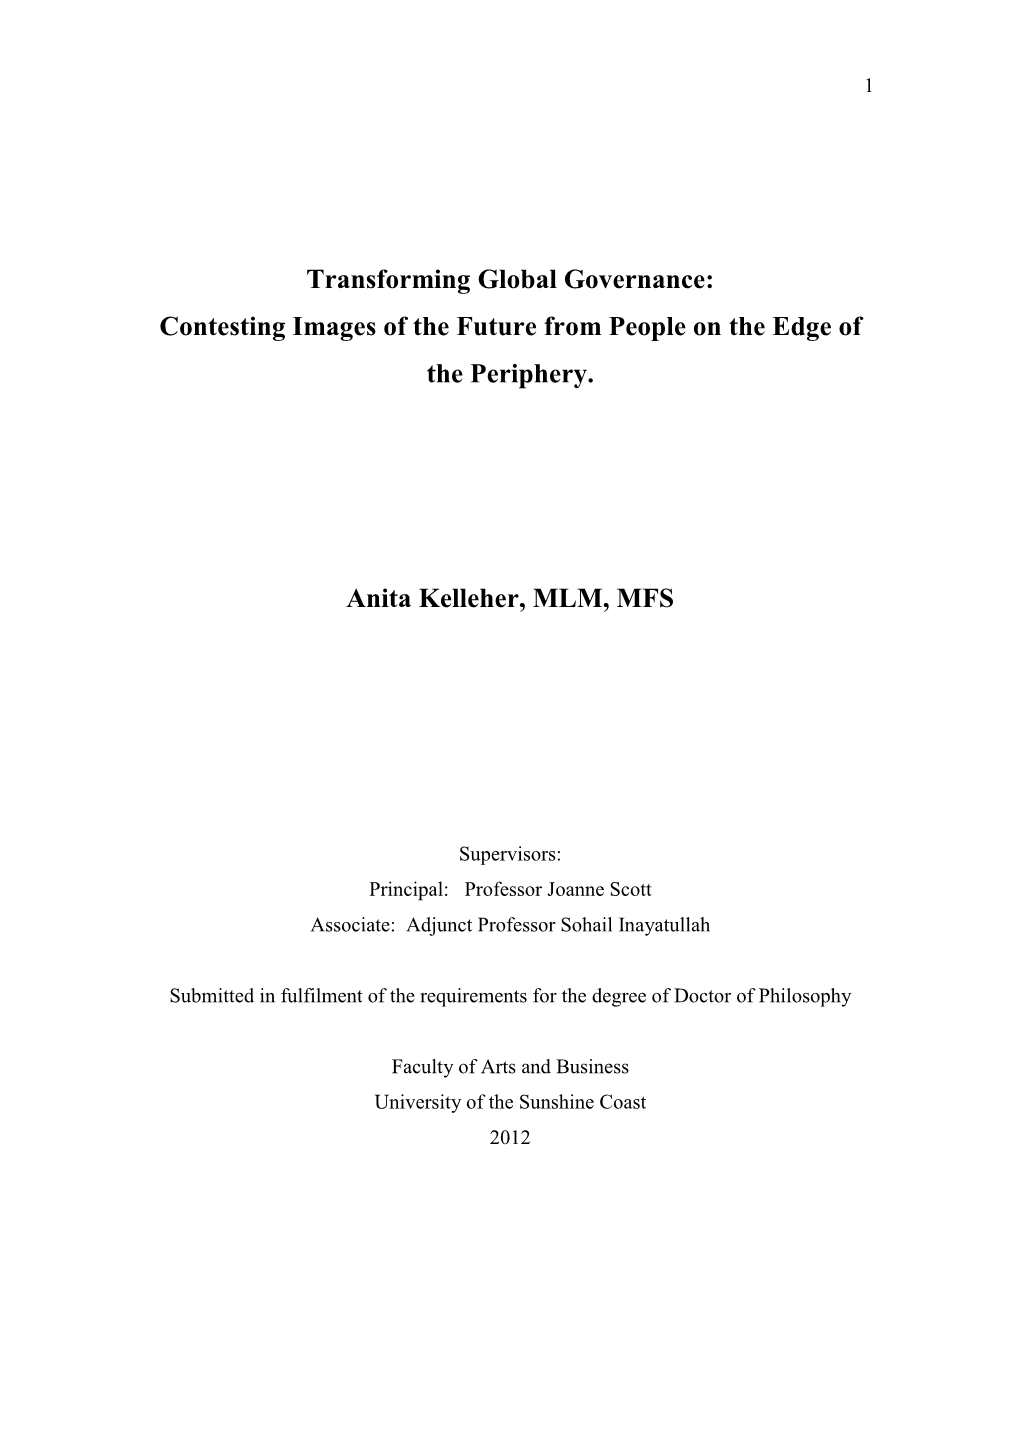 Transforming Global Governance: Contesting Images of the Future from People on the Edge of the Periphery